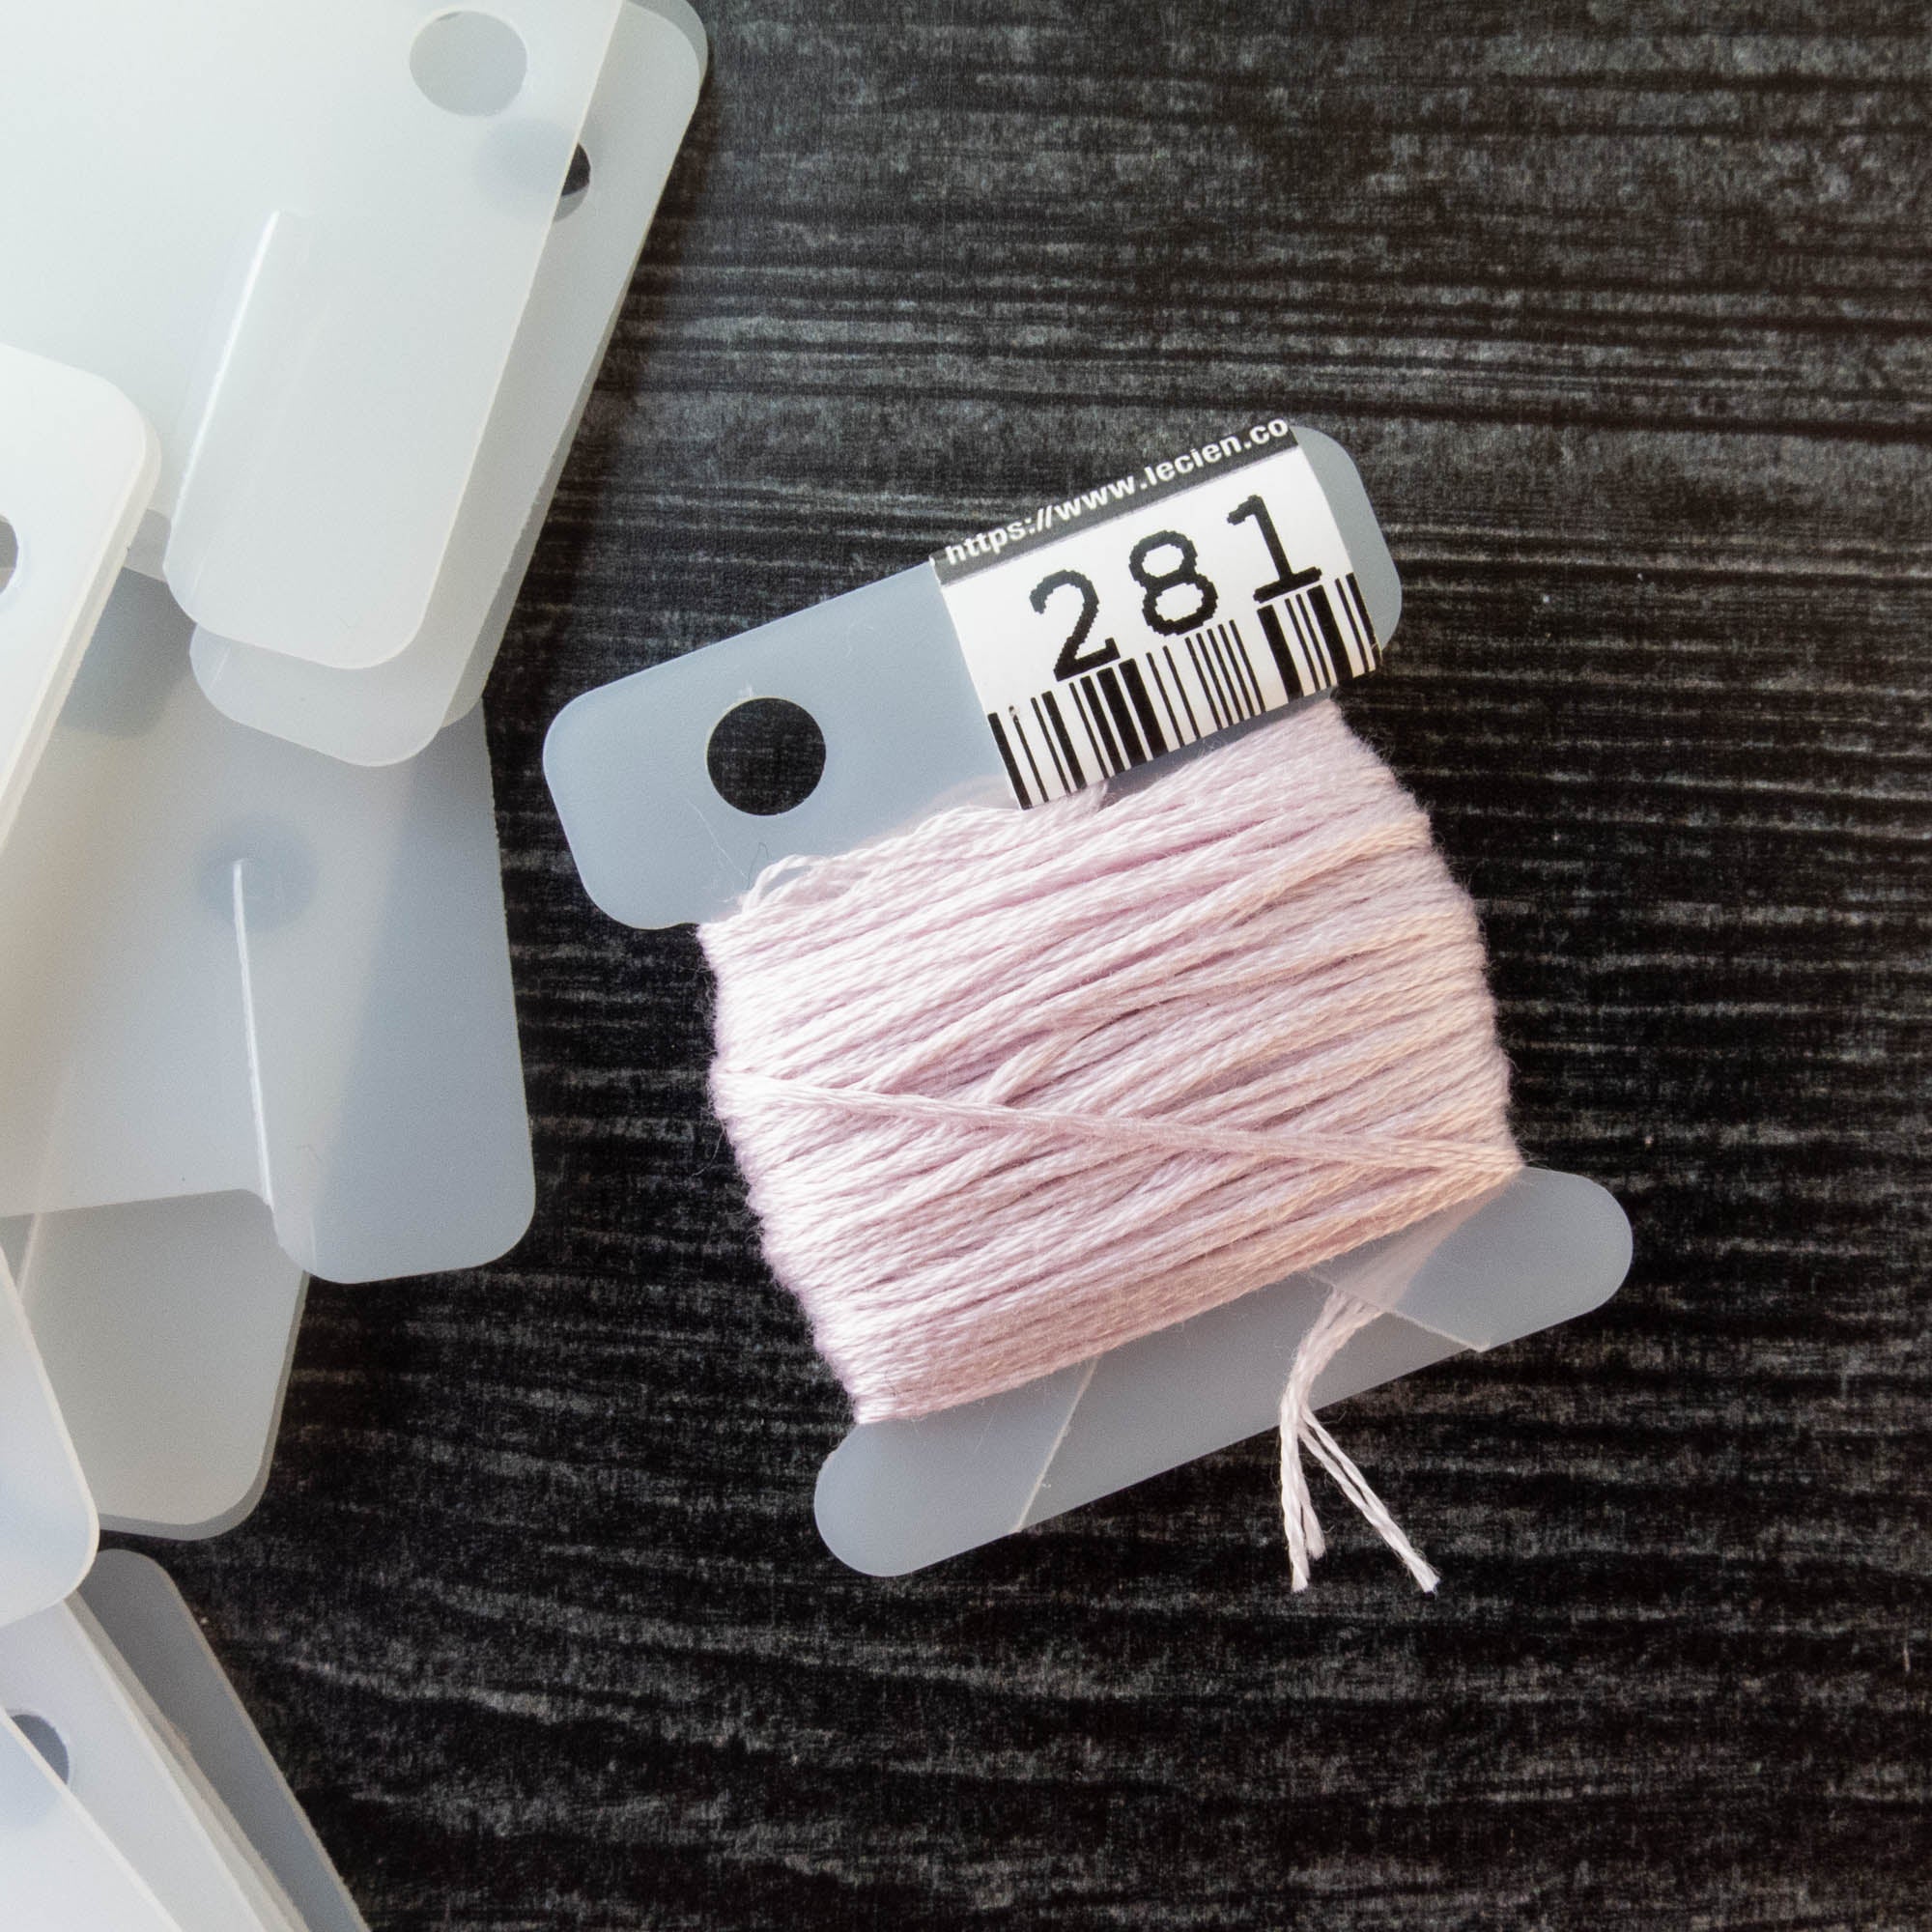 Print Your Own Embroidery Floss Bobbins